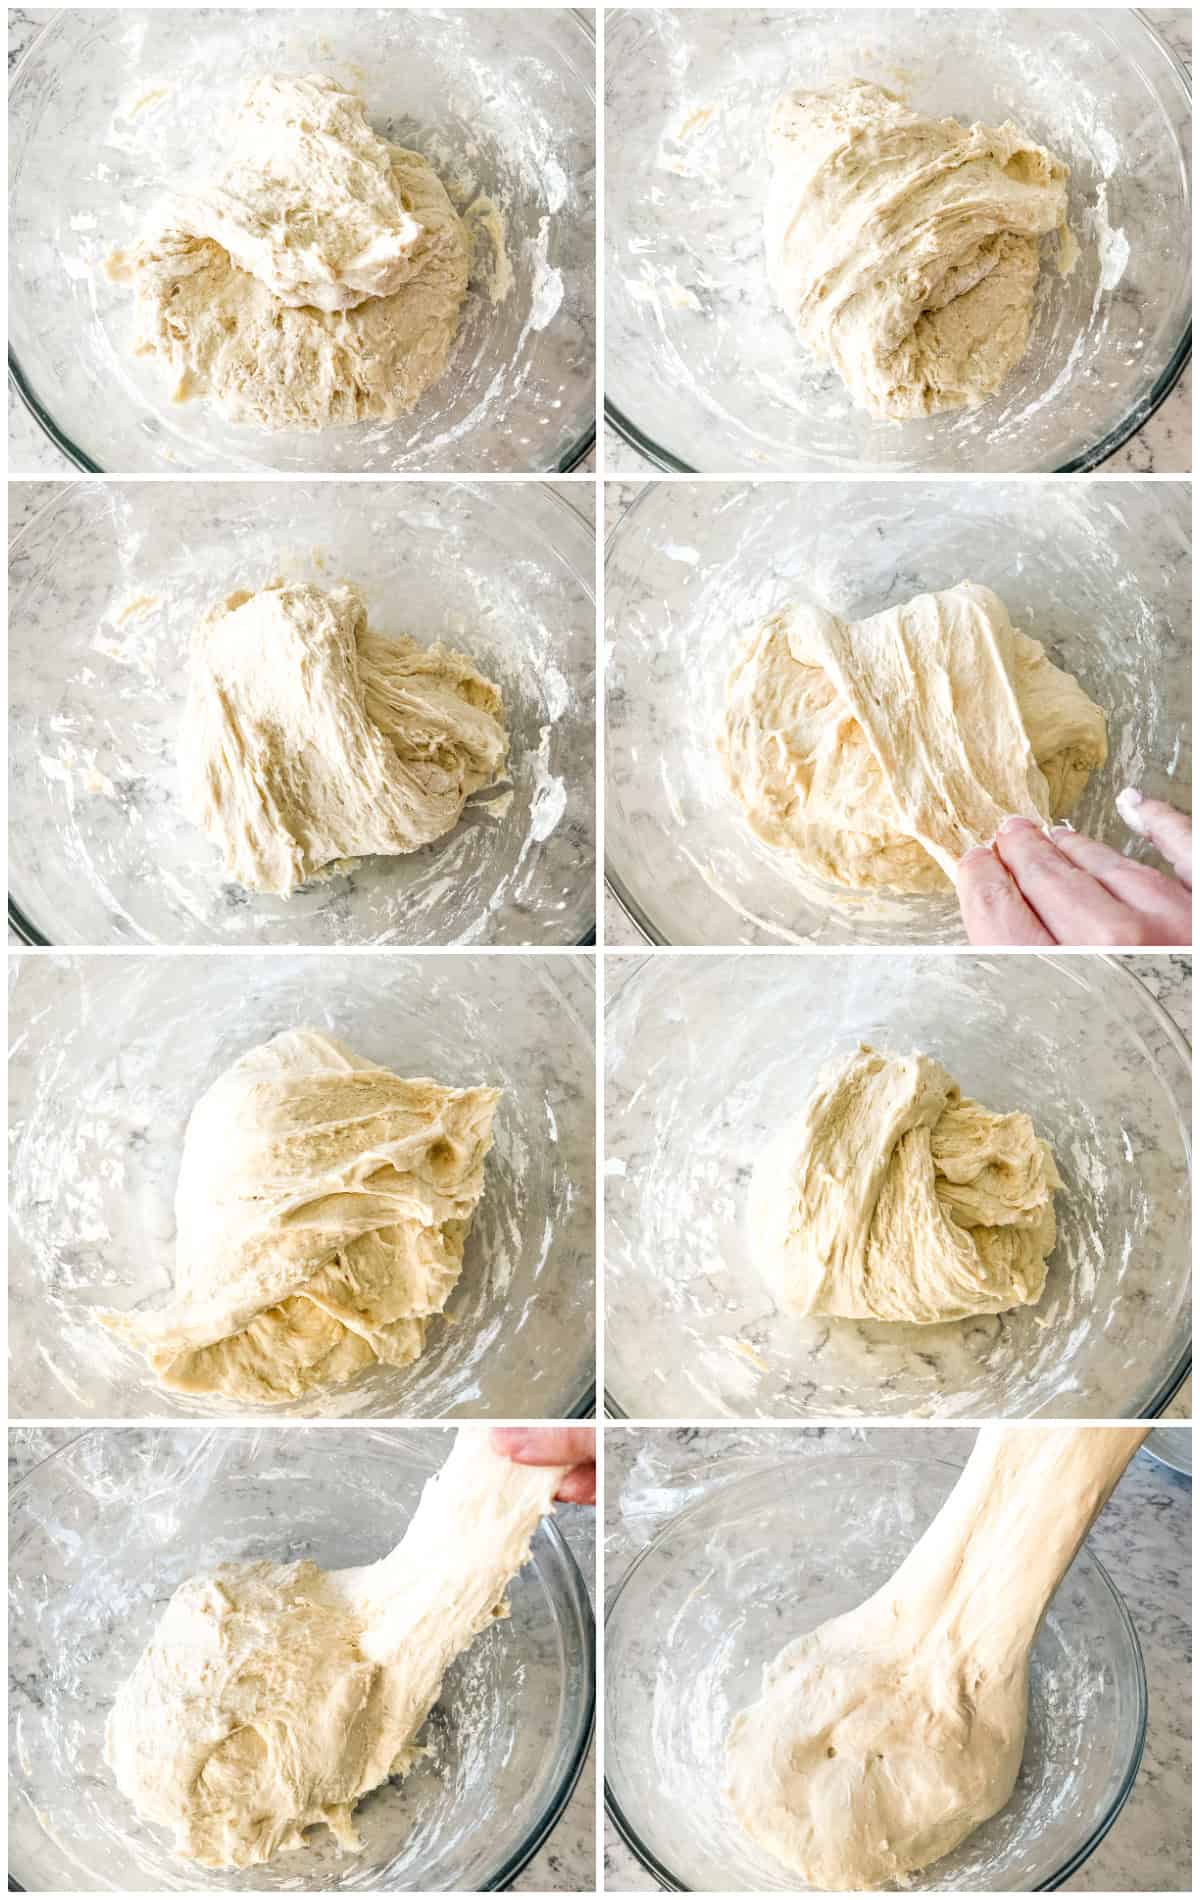 step by step instructions for making overnight sourdough bread recipe